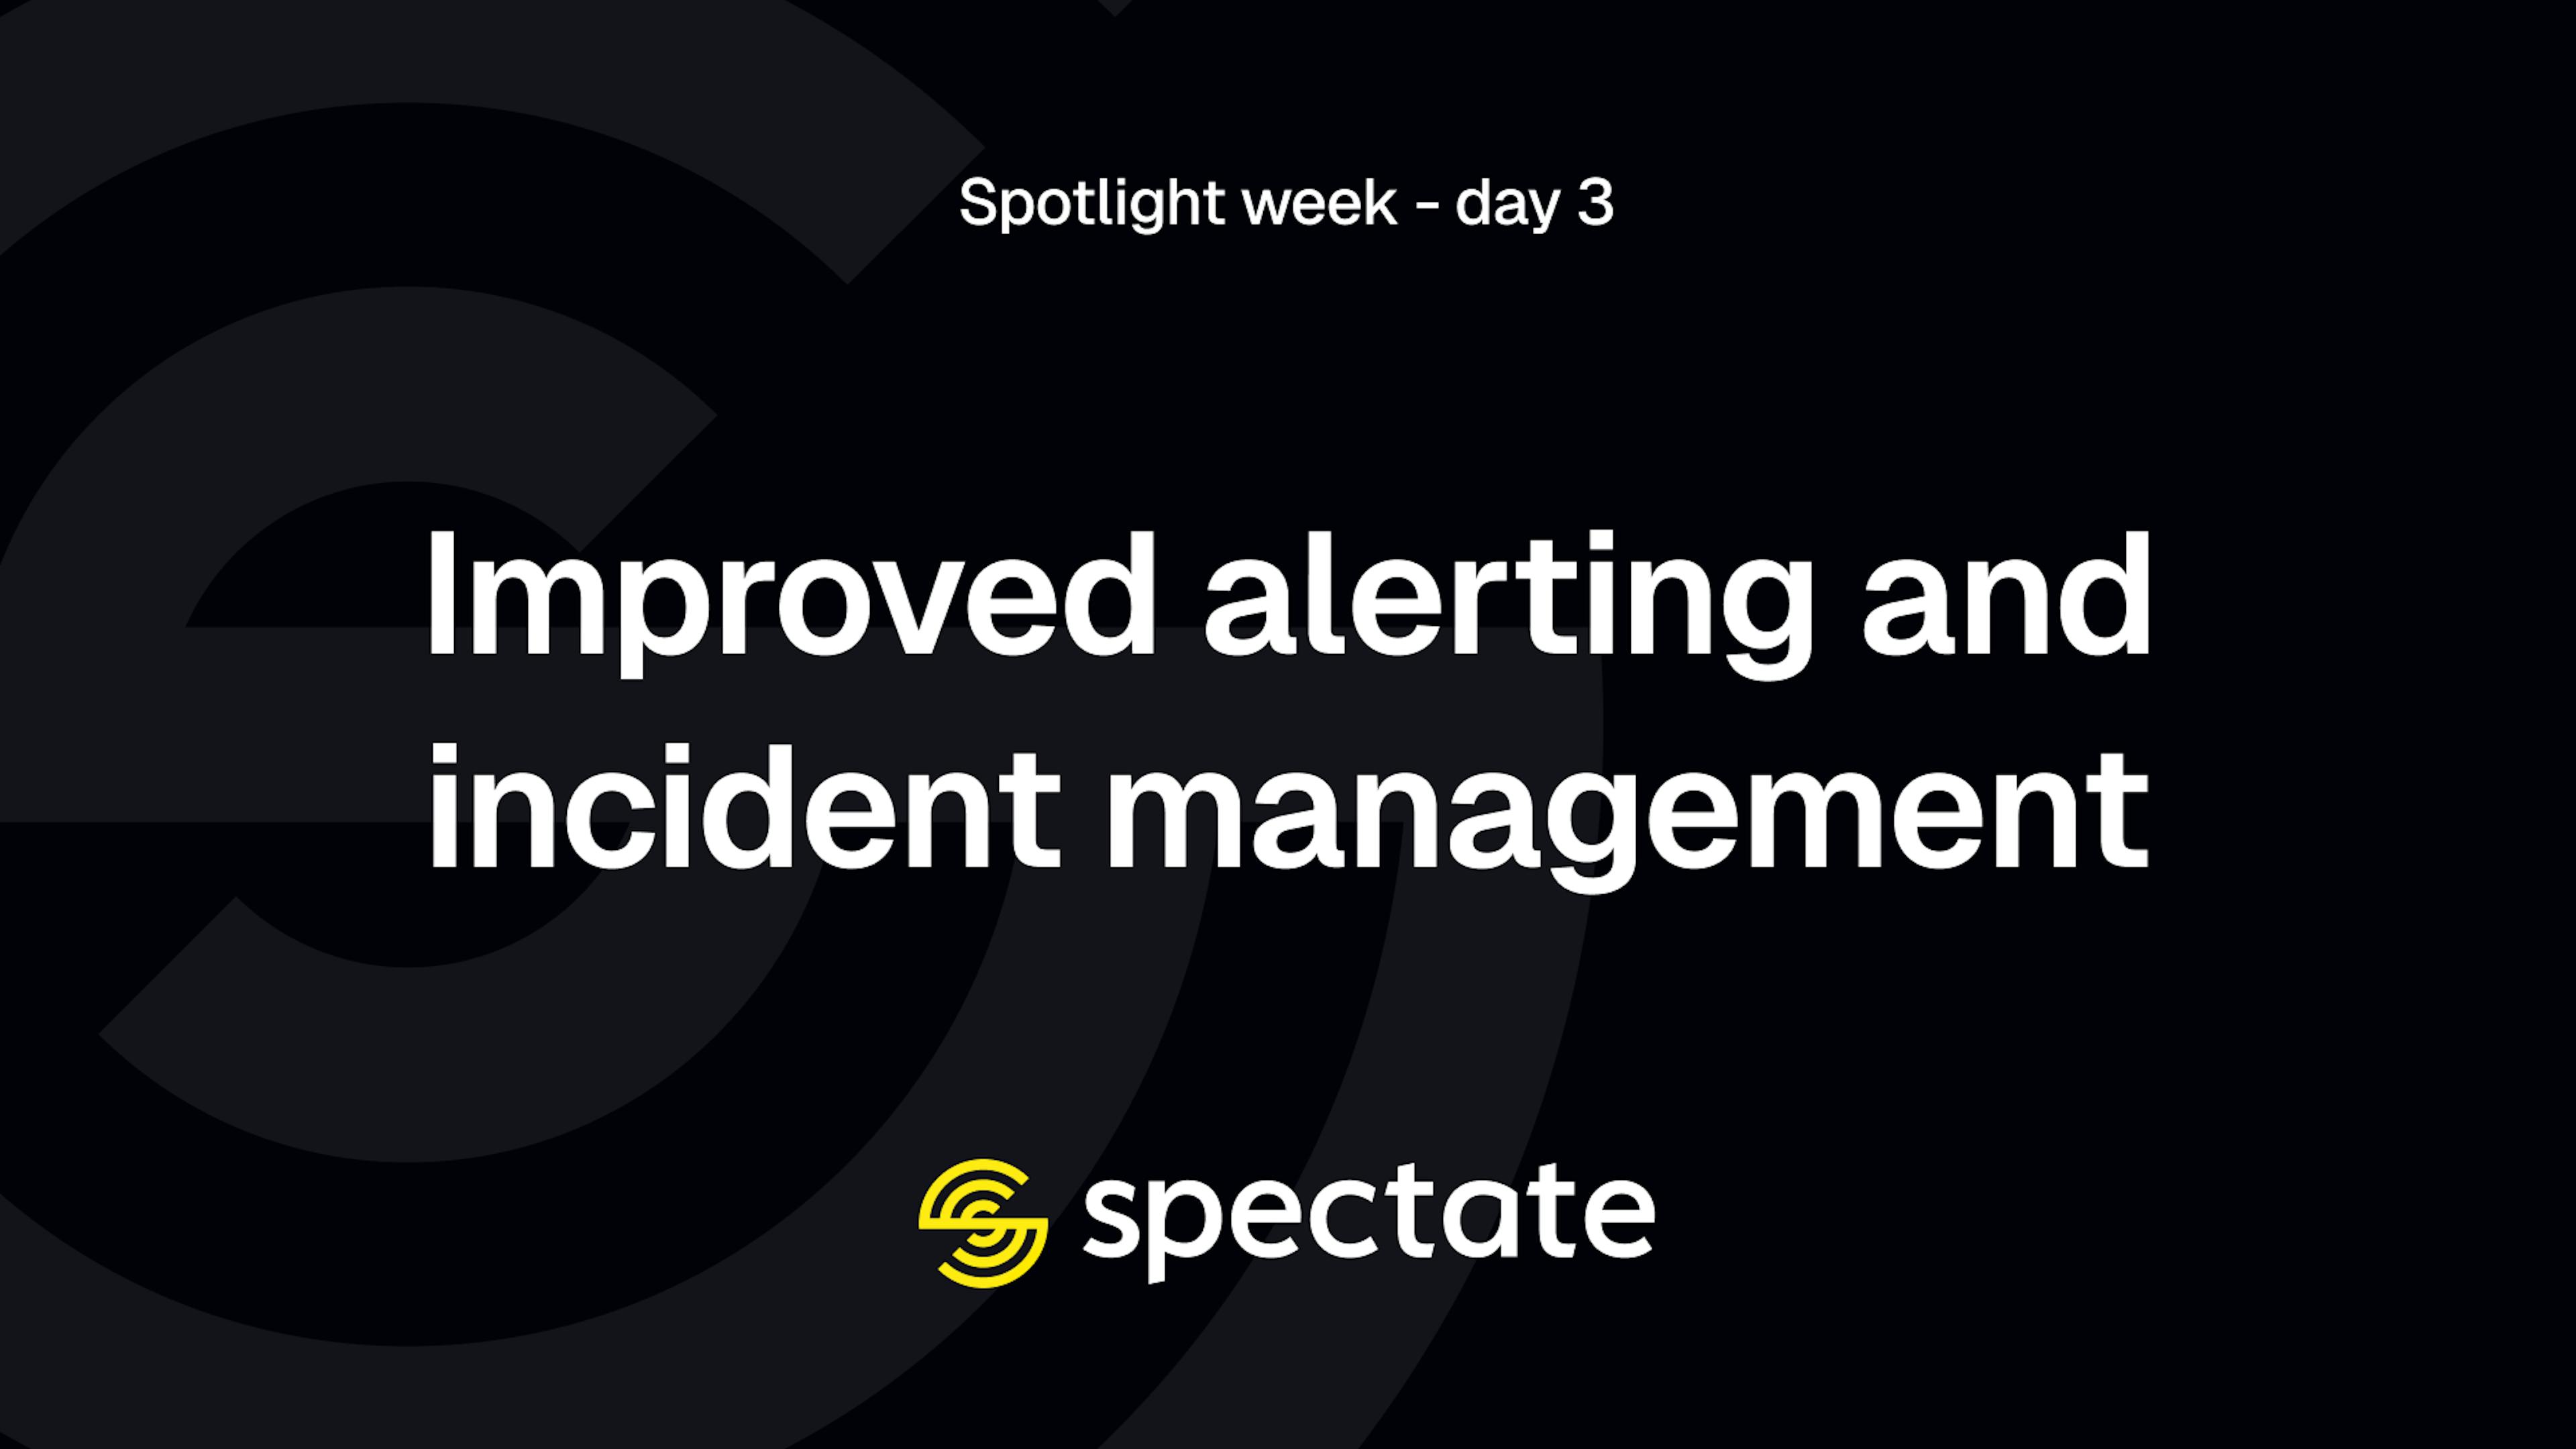 Spotlight week day 3: Improved alerting and incident management